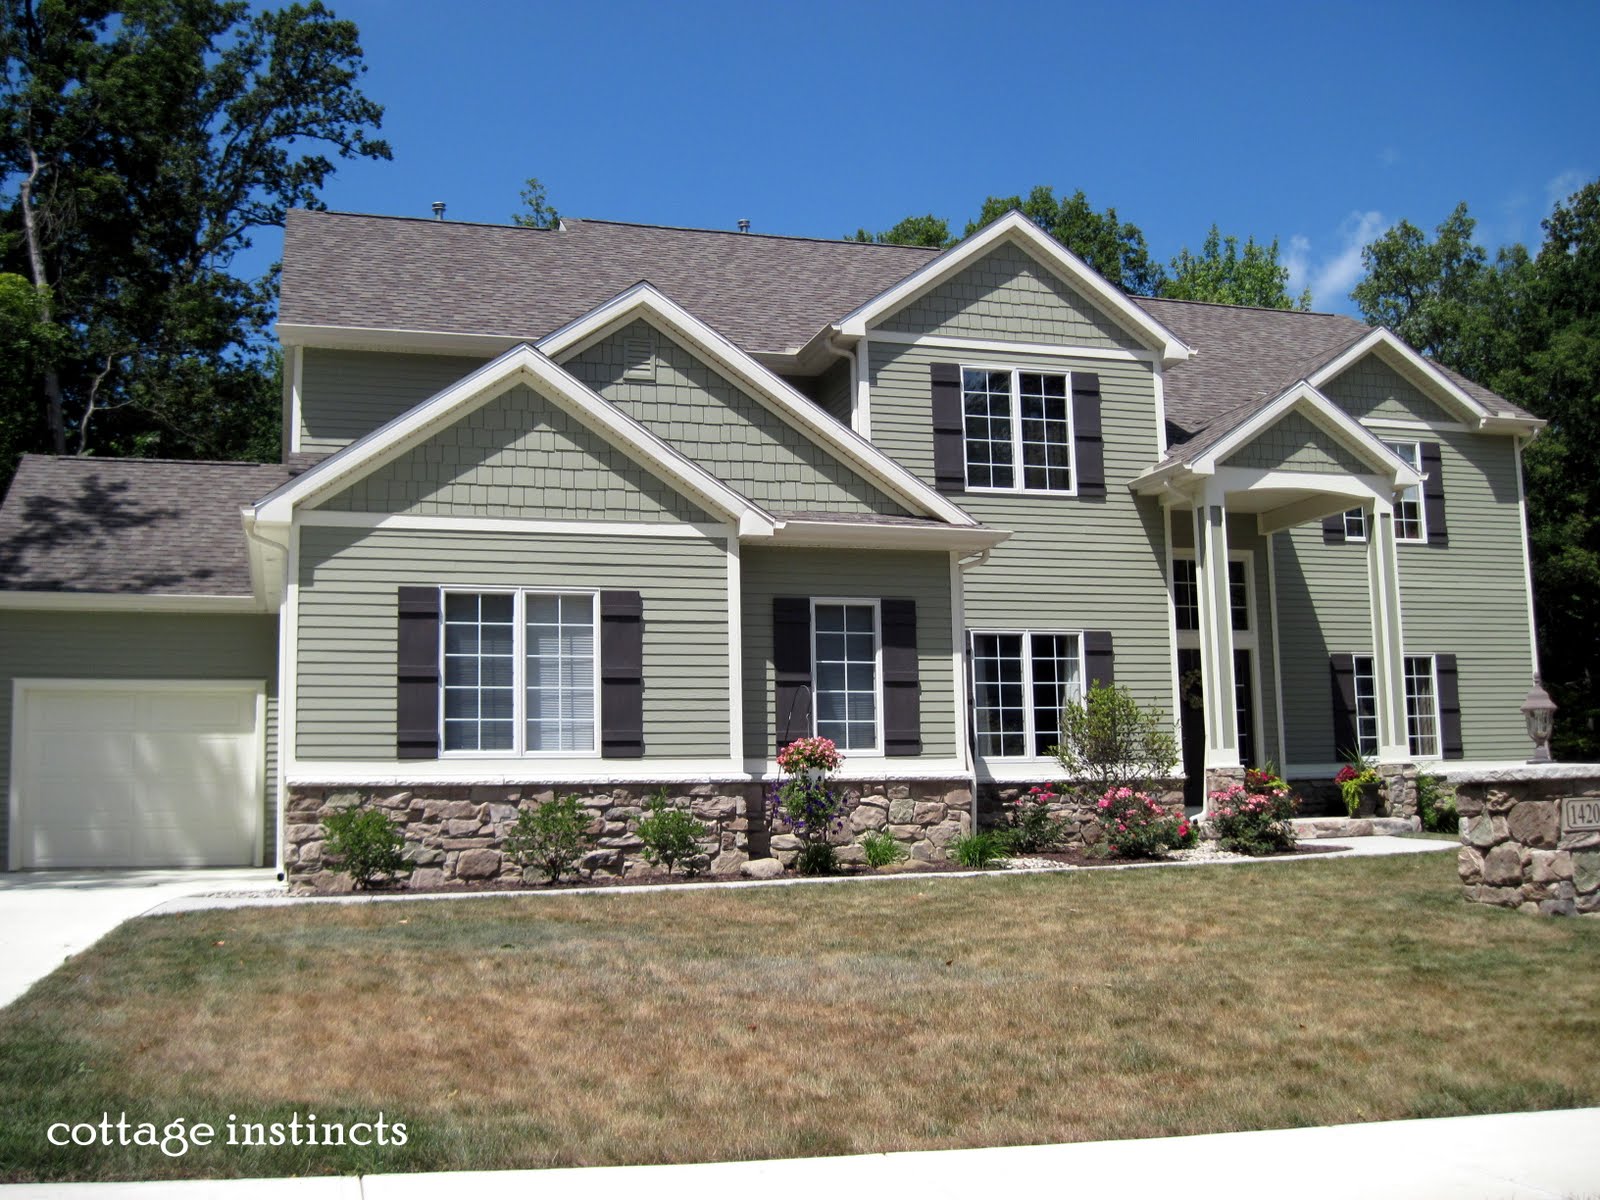 5 of the Most Popular Home Siding Colors - Exteriors by Highmark